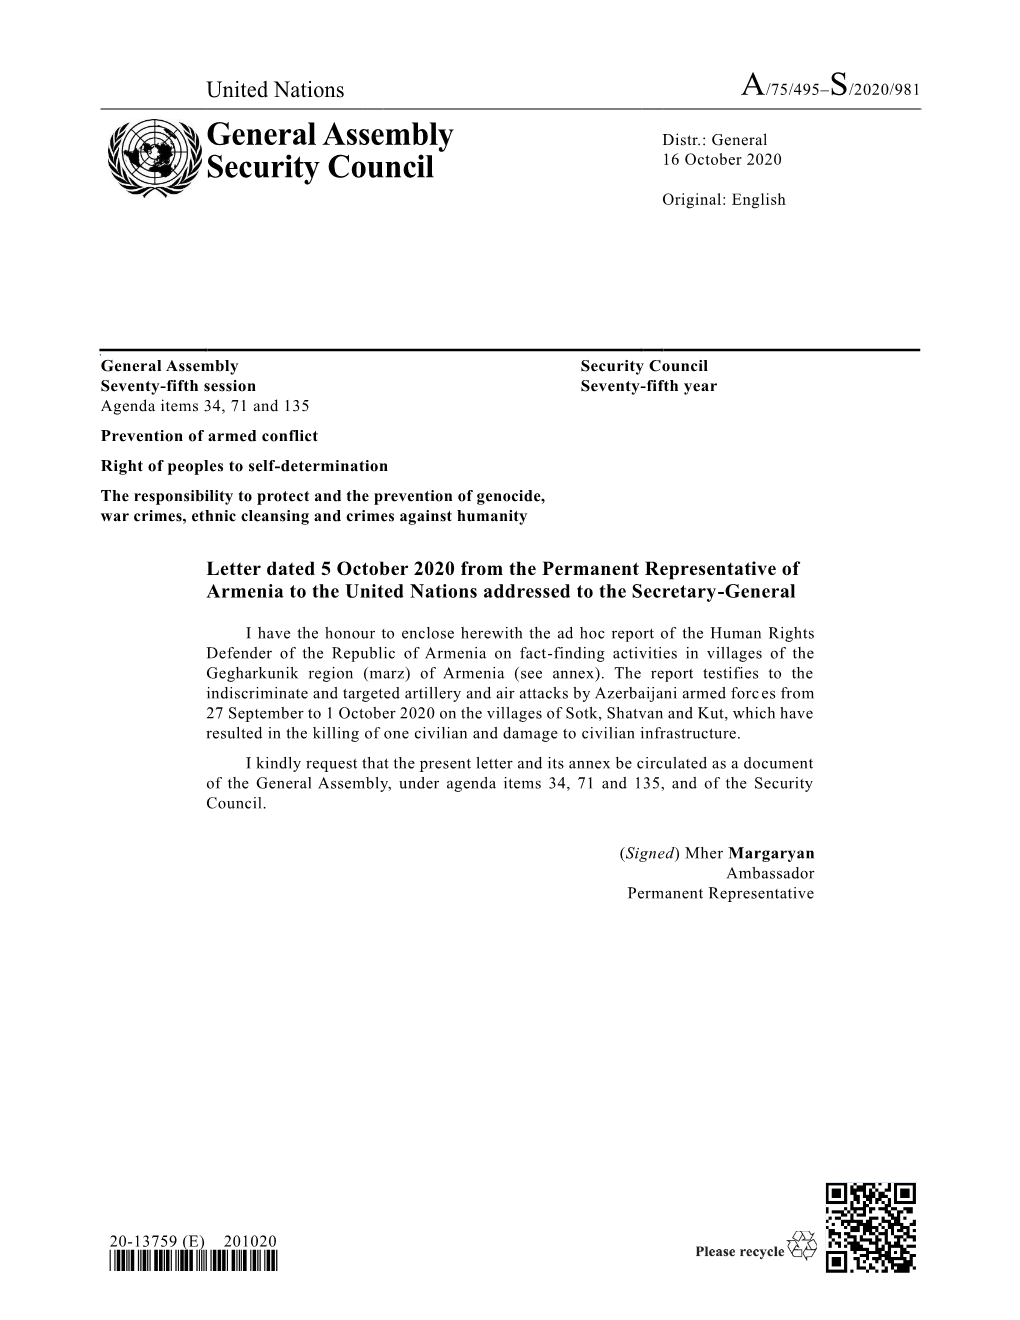 General Assembly Security Council Seventy-Fifth Session Seventy-Fifth Year Agenda Items 34, 71 and 135